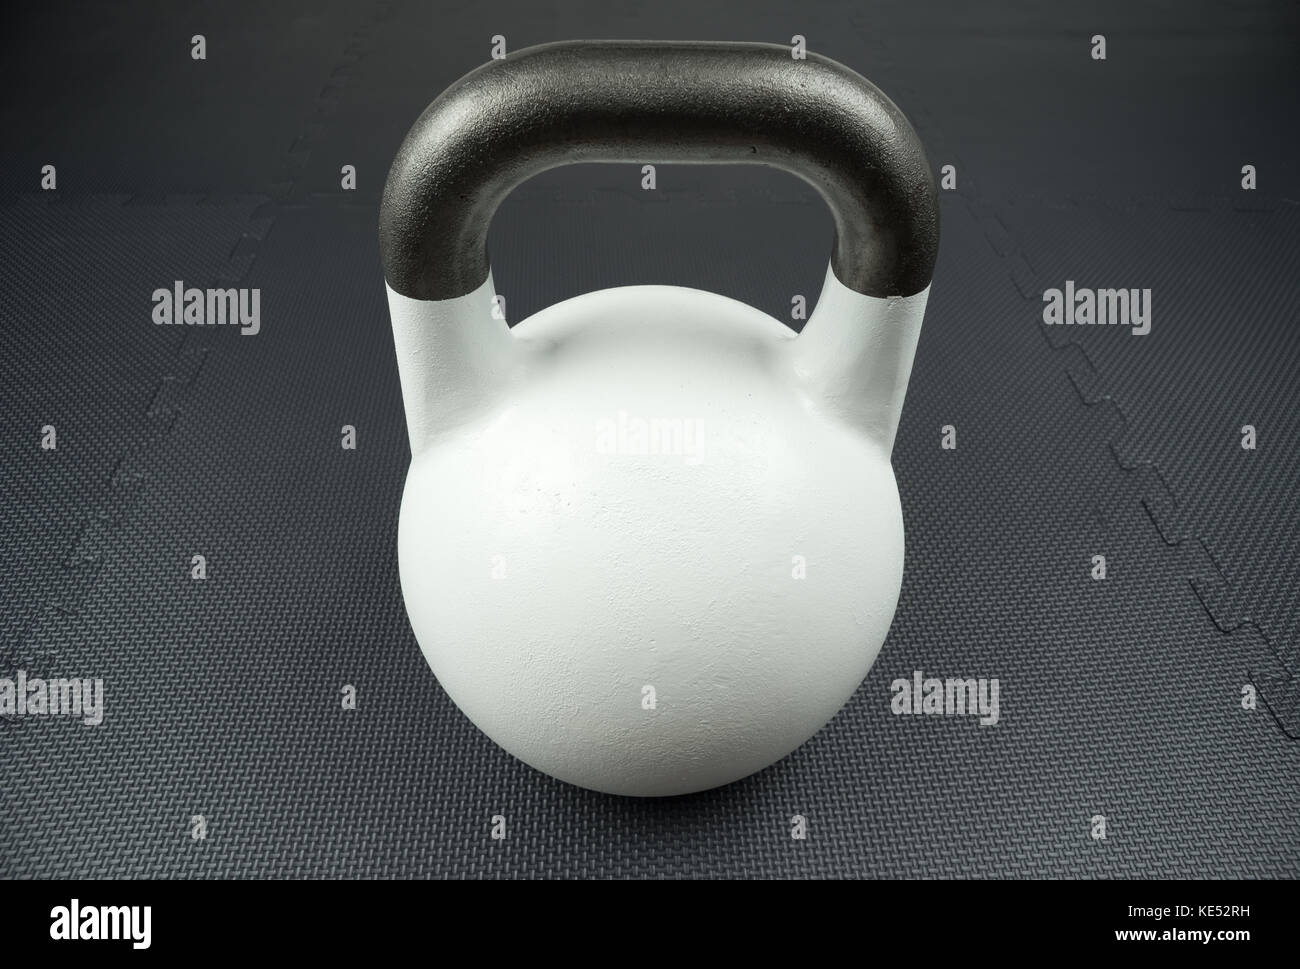 White 10kg competition kettlebell on a fitness studio gym floor with rubber tiles. Potential text / writing space at center of kettlebell. Stock Photo